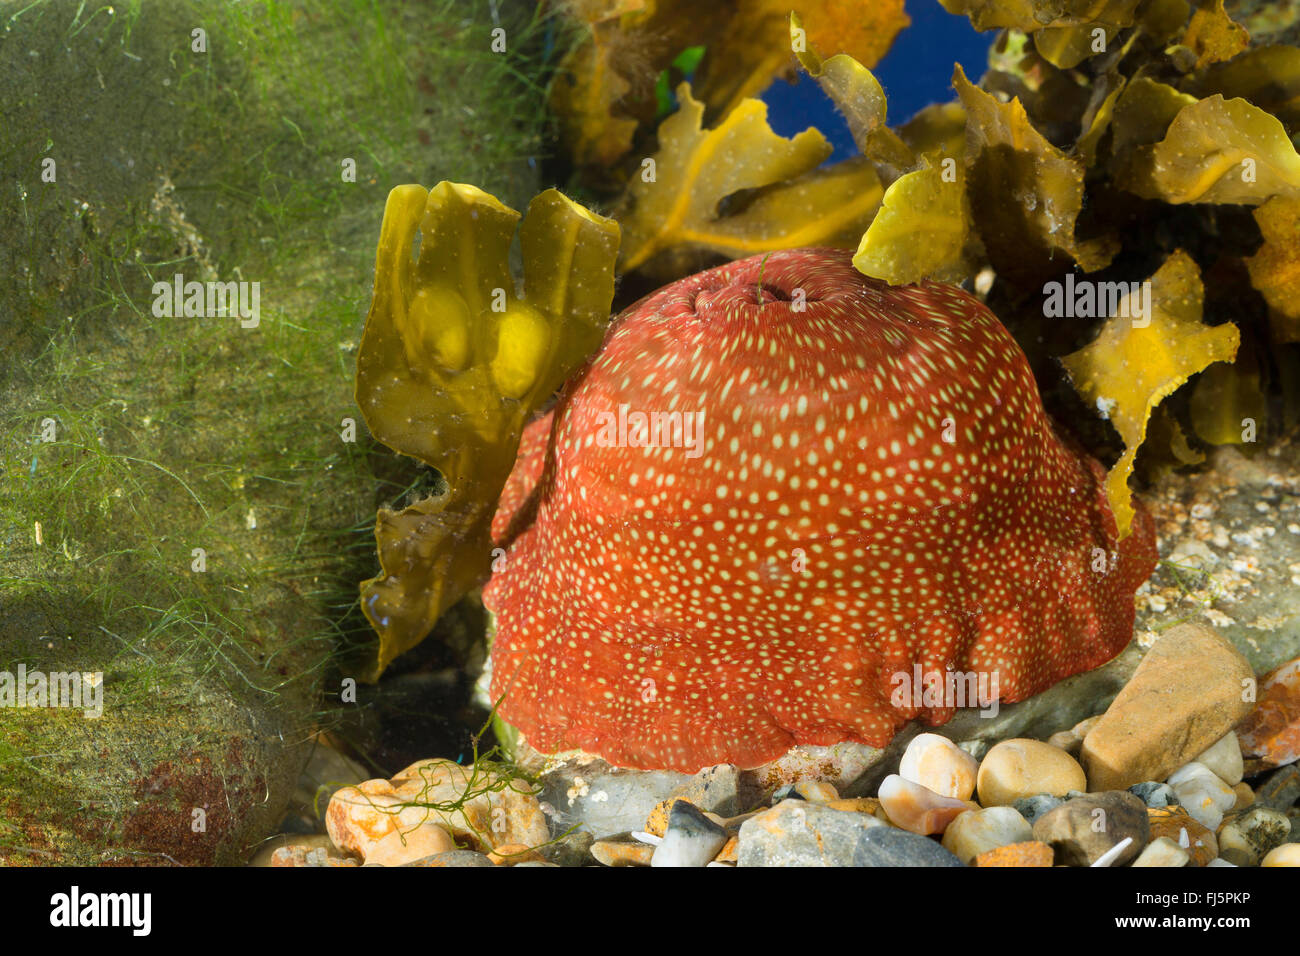 strawberry anemone (Actinia fragacea, Actinia equina var. fragacea), with inserted tentacles Stock Photo